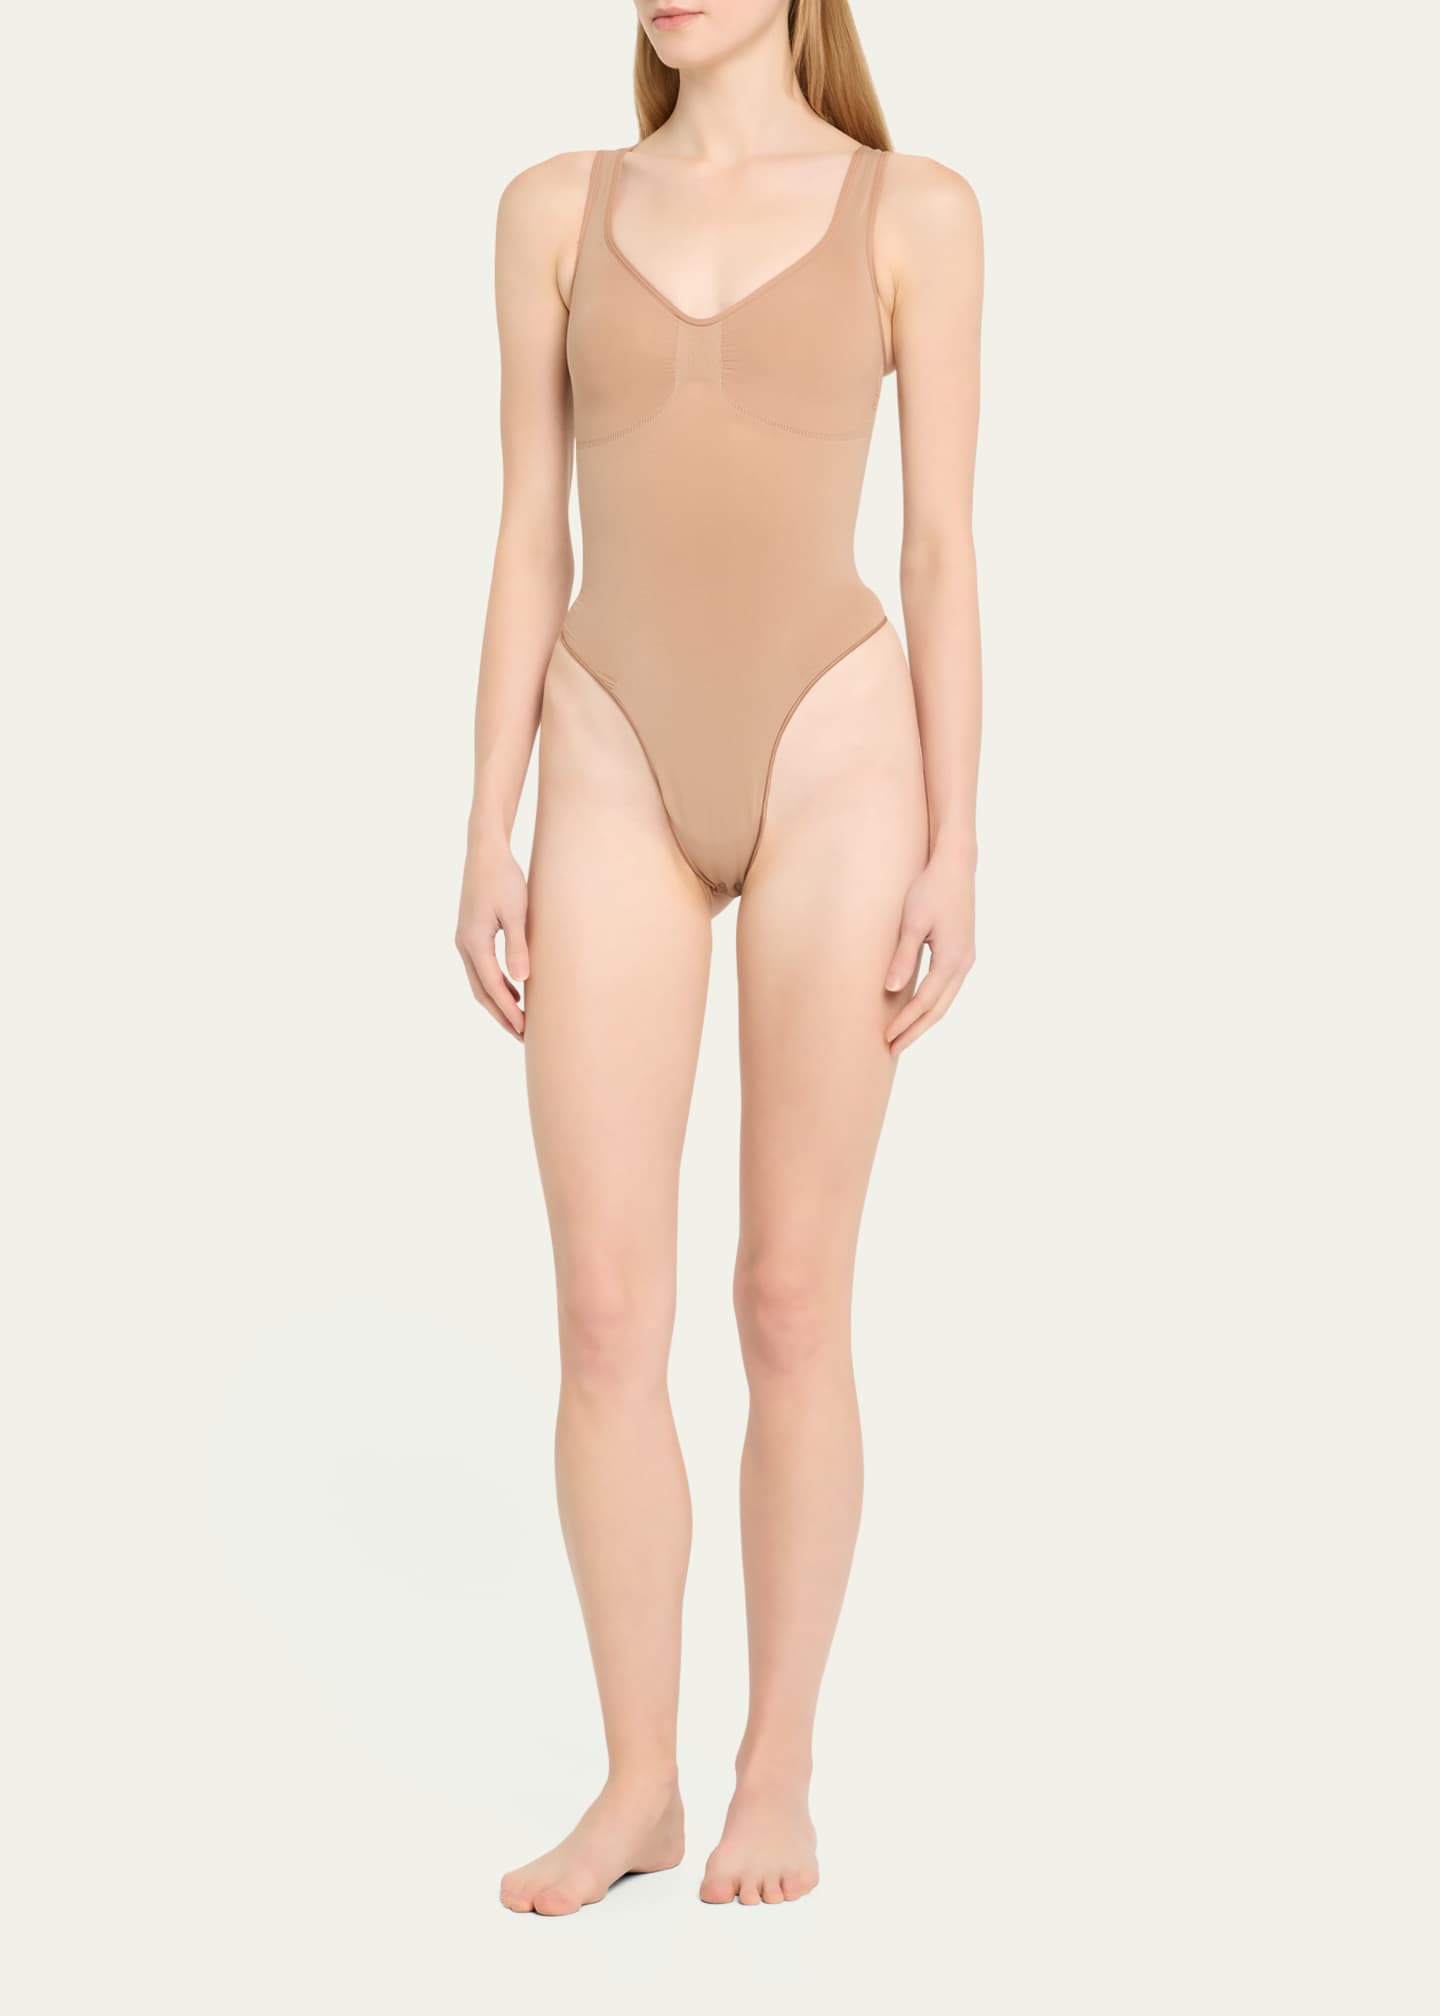 Sweet Tops High Neck Sculpting Thong Bodysuit Skims With Seamless